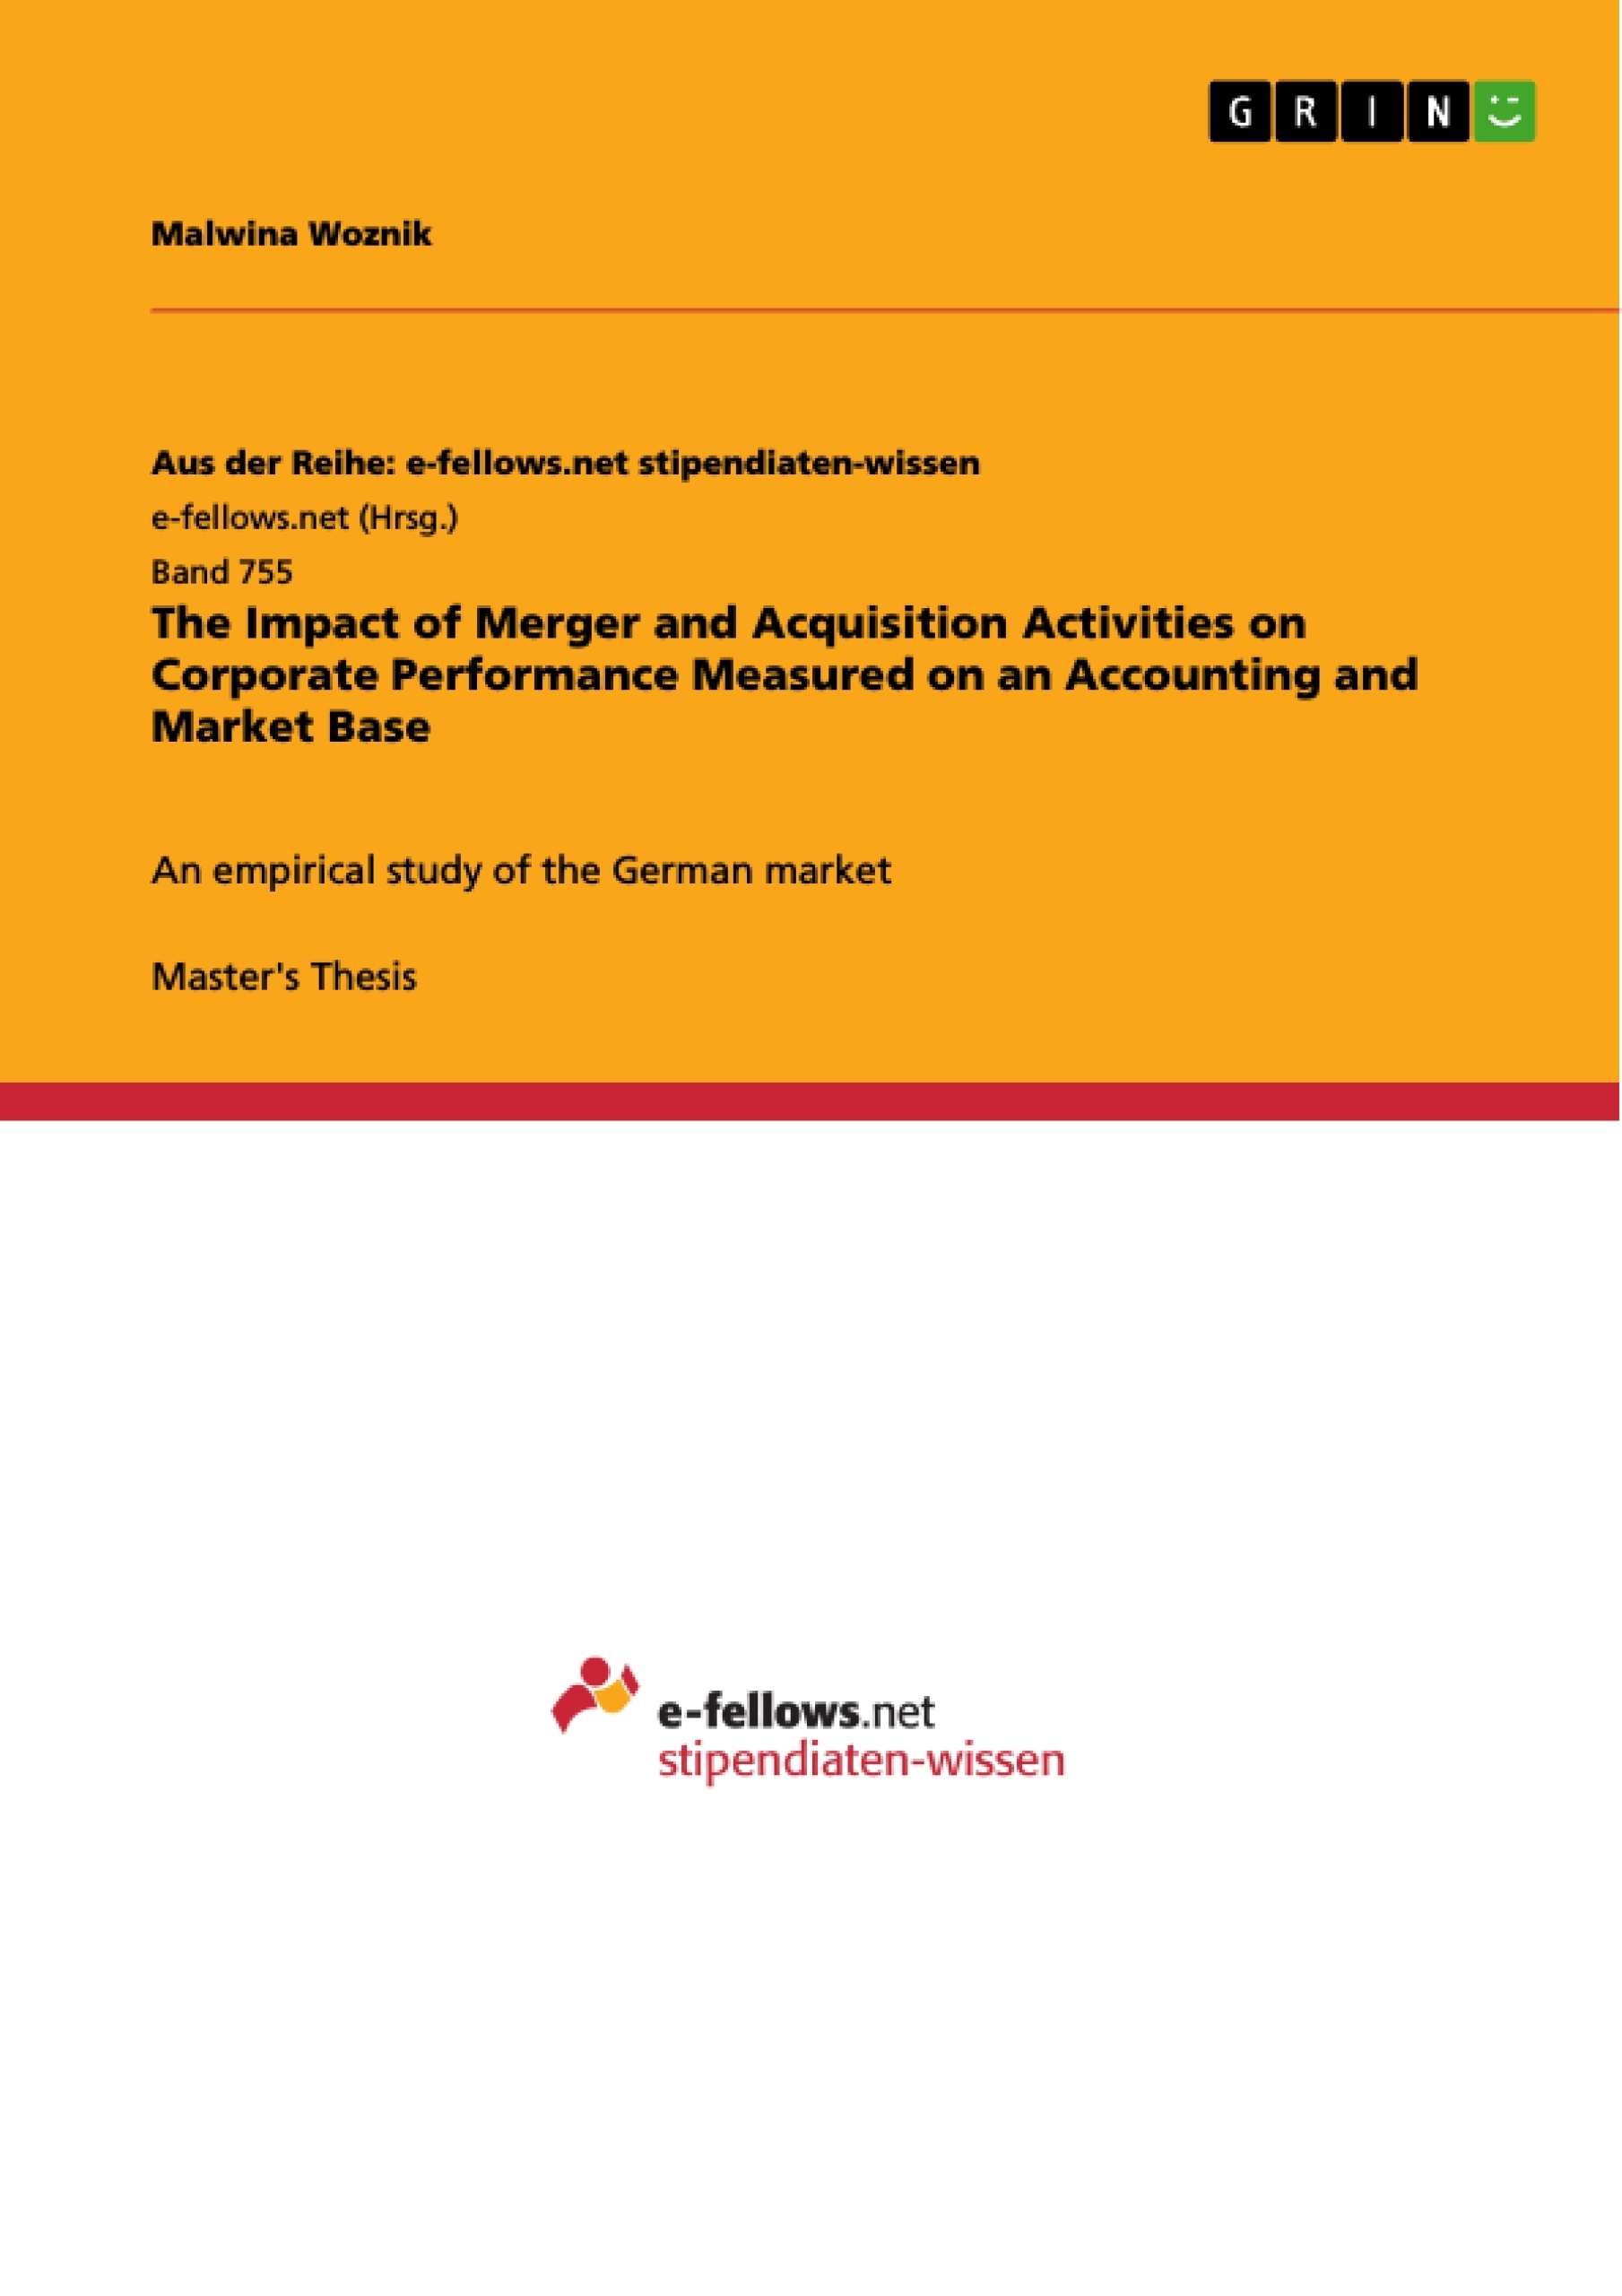 Título: The Impact of Merger and Acquisition Activities on Corporate Performance Measured on an Accounting and Market Base